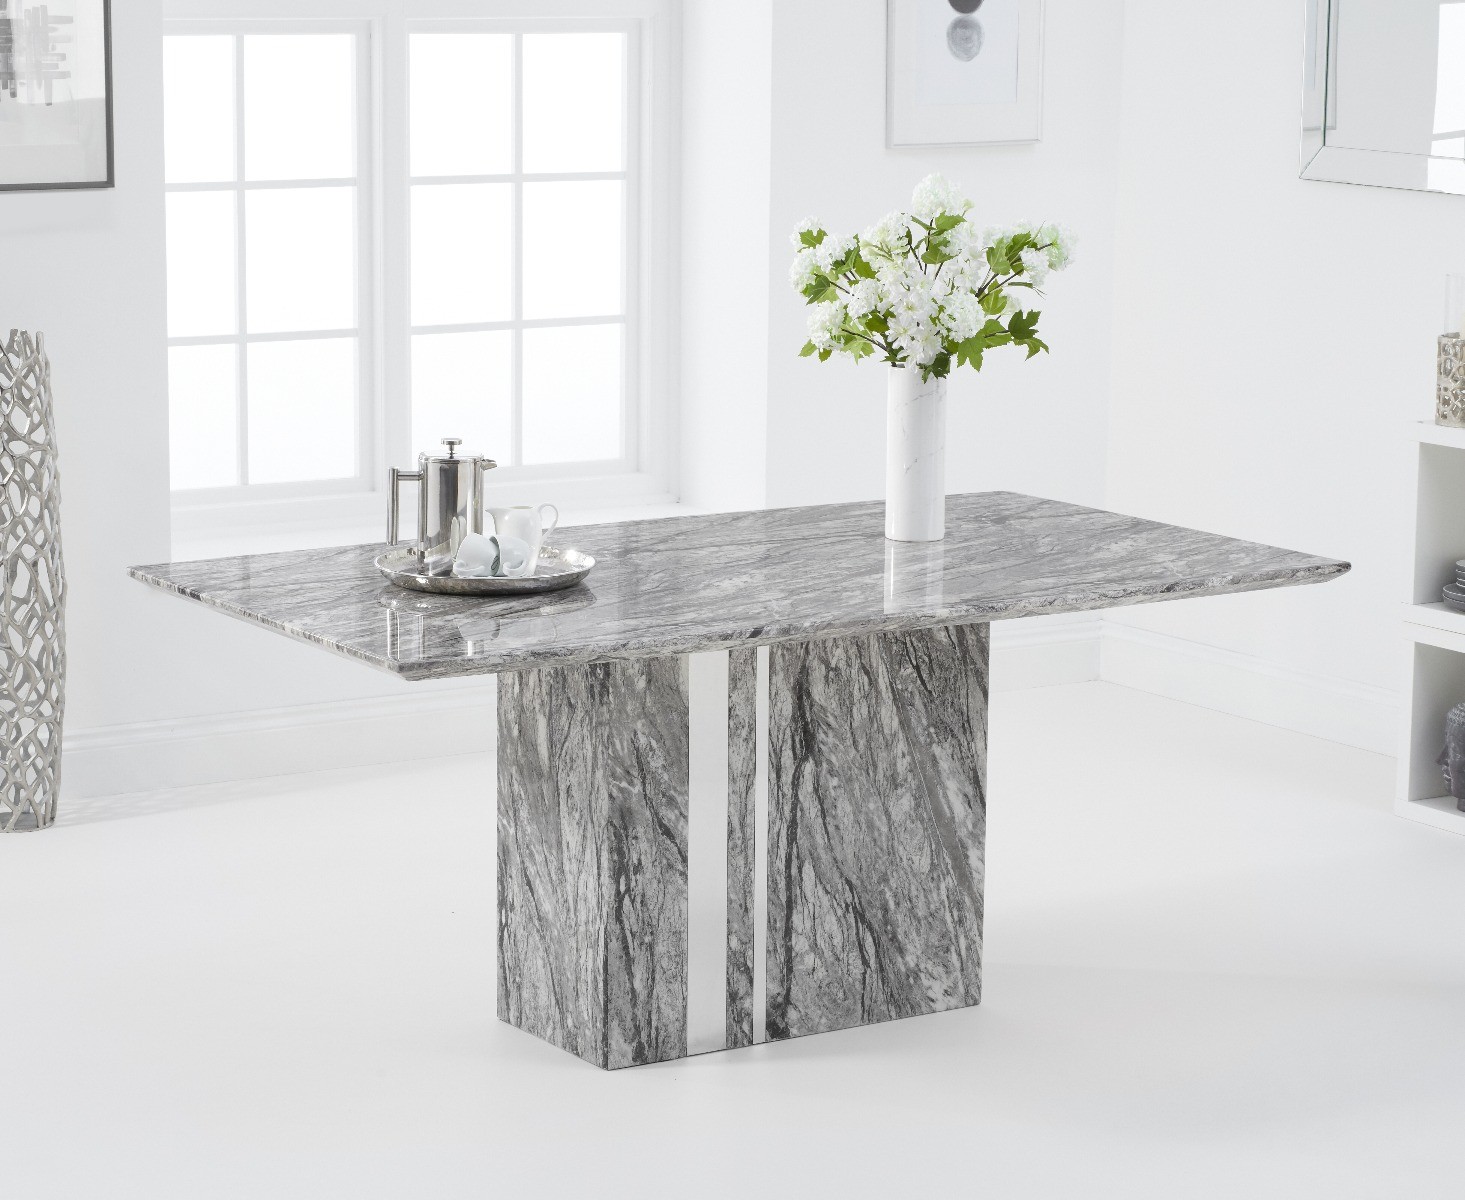 Photo 2 of Alicia 180cm grey marble dining table with 6 white aldo chairs